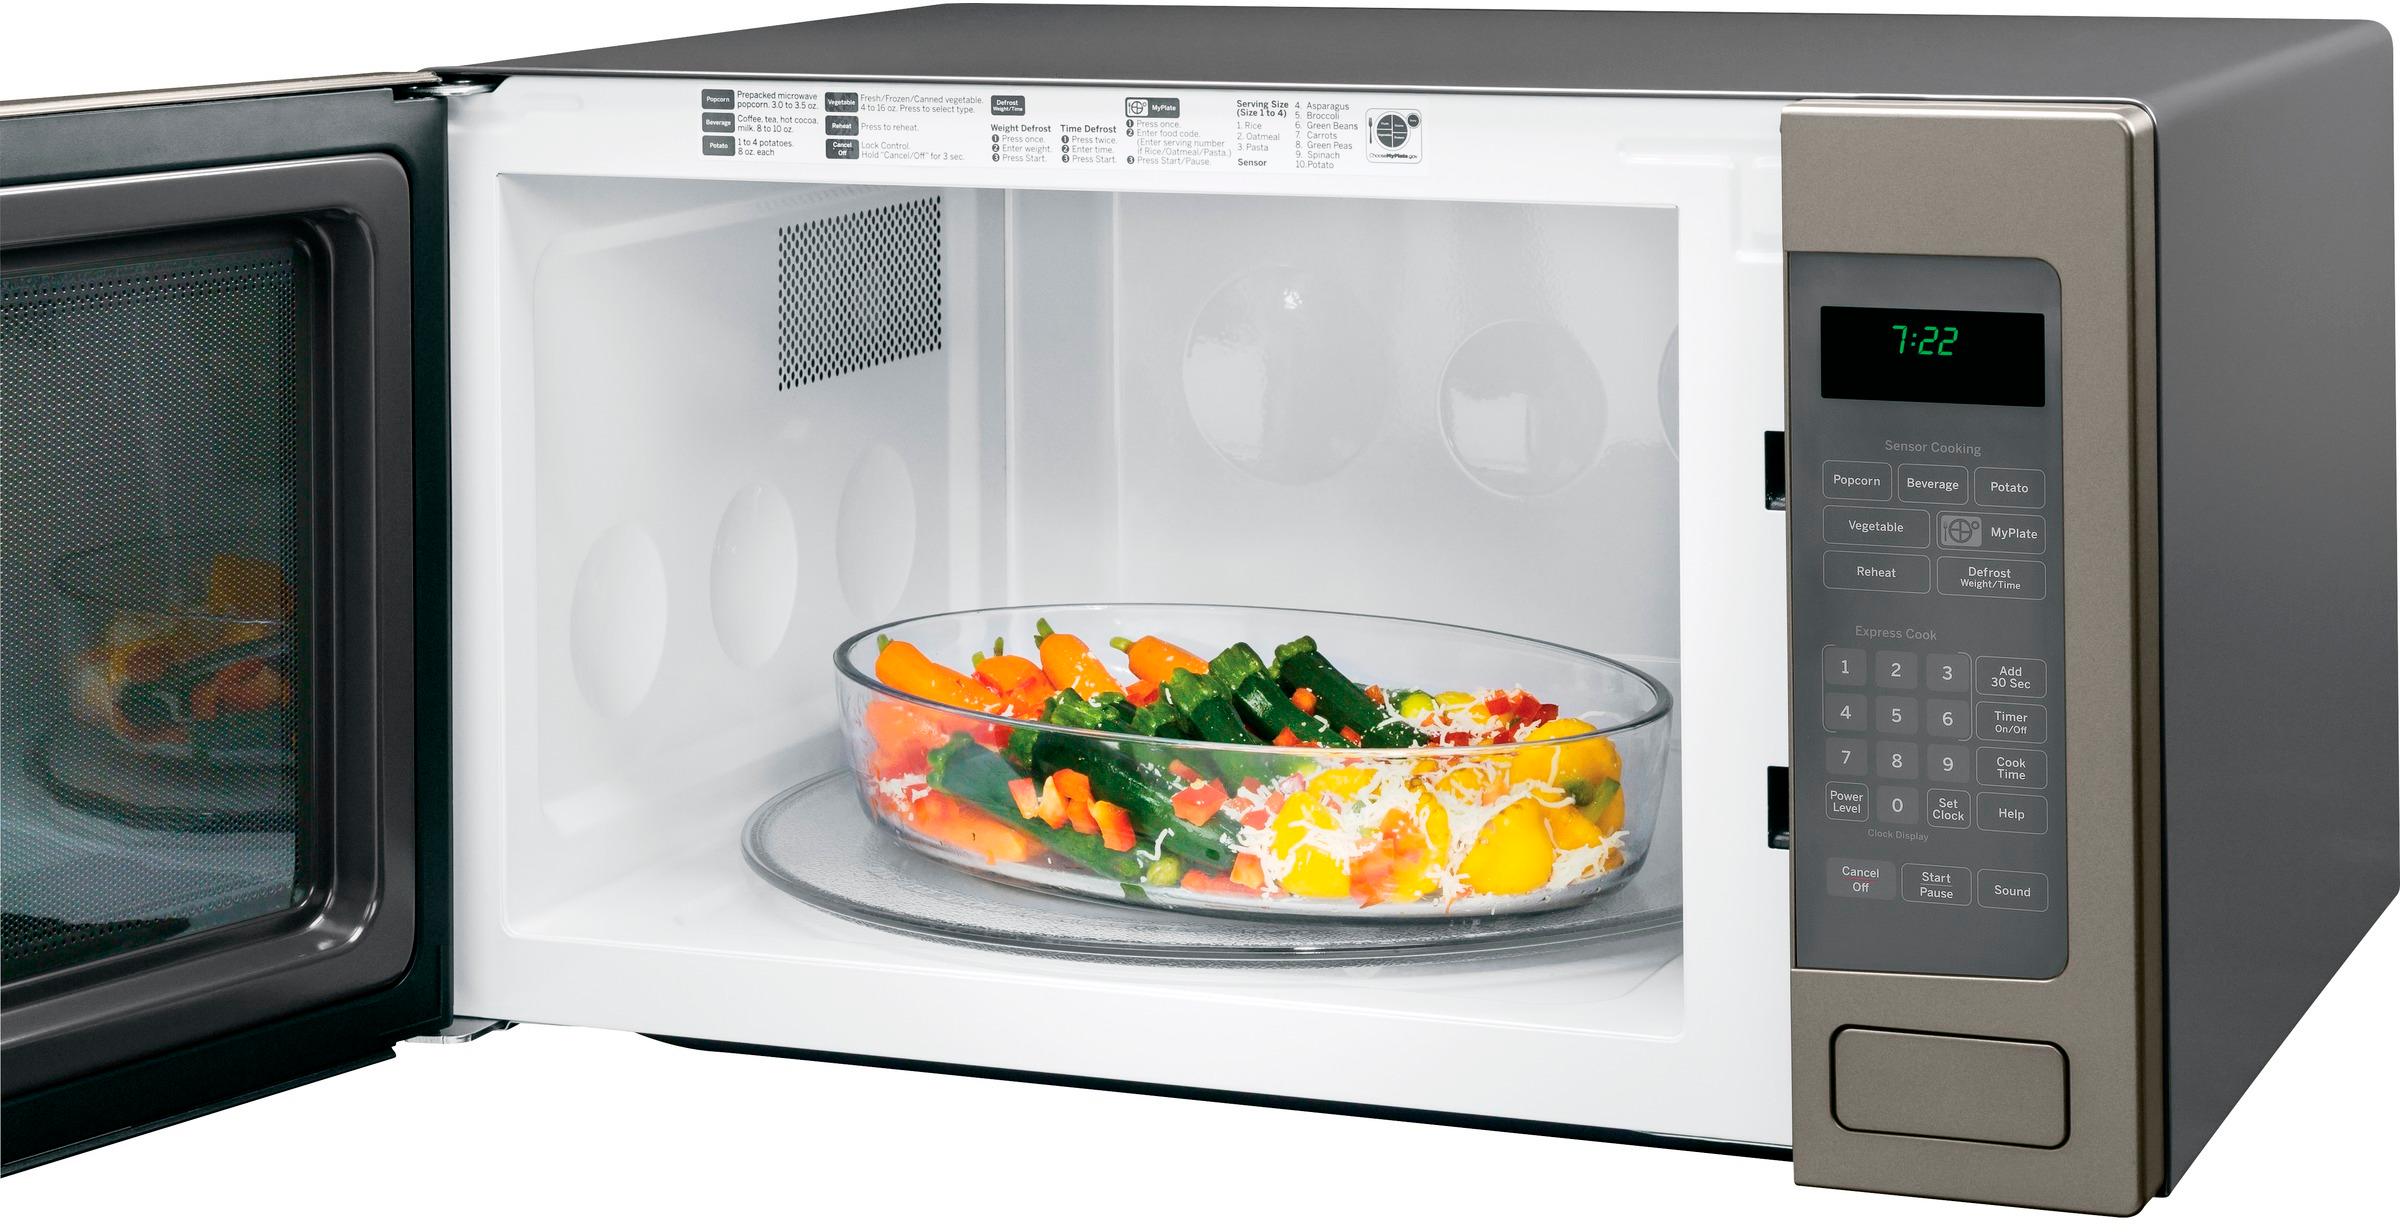 mikeludwigdesign: What Is The Average Size Of A Countertop Microwave